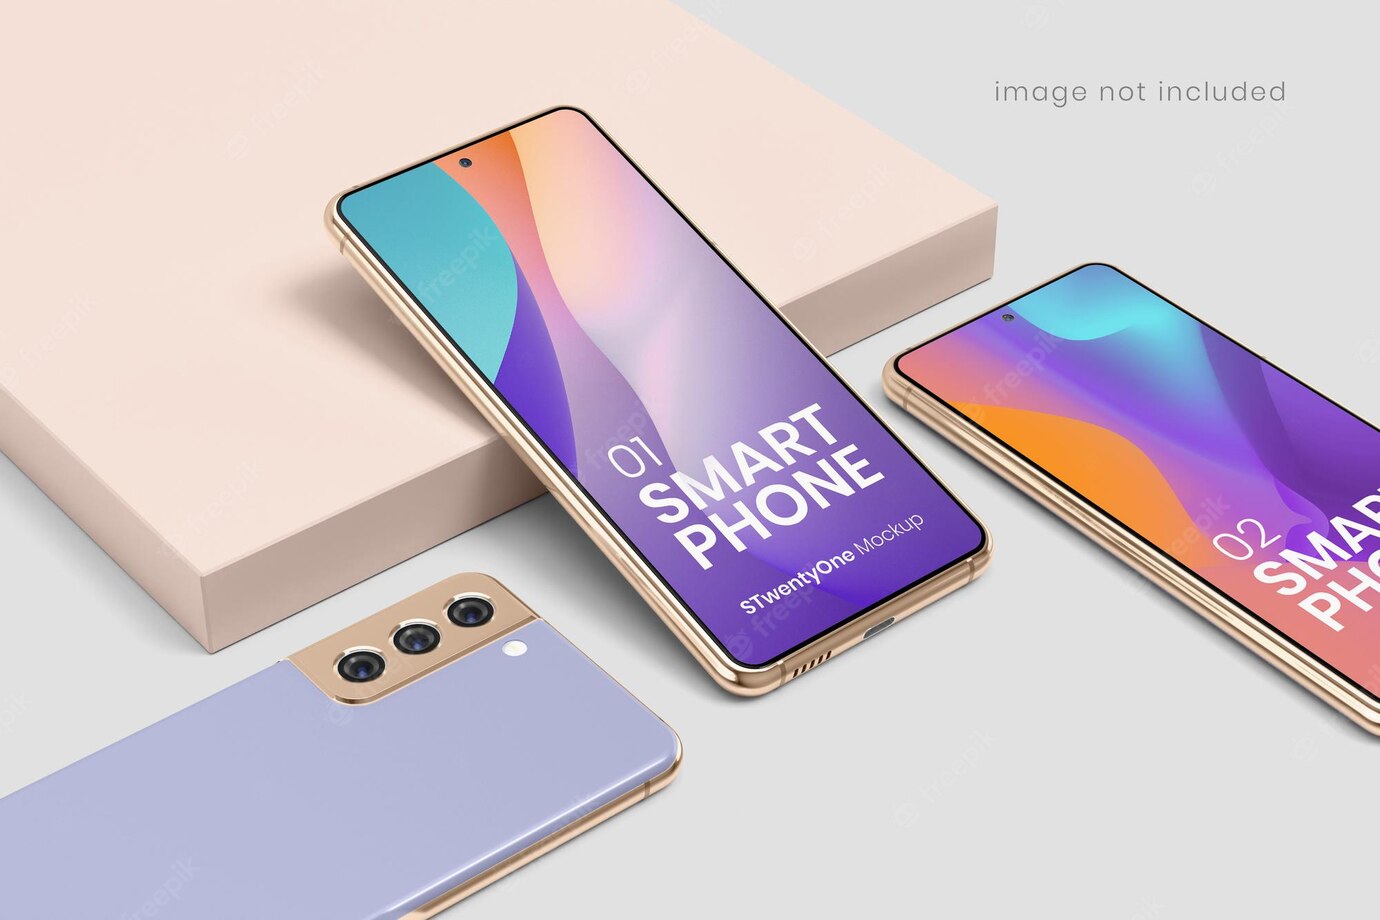 android smartphone device mockup 165789 468